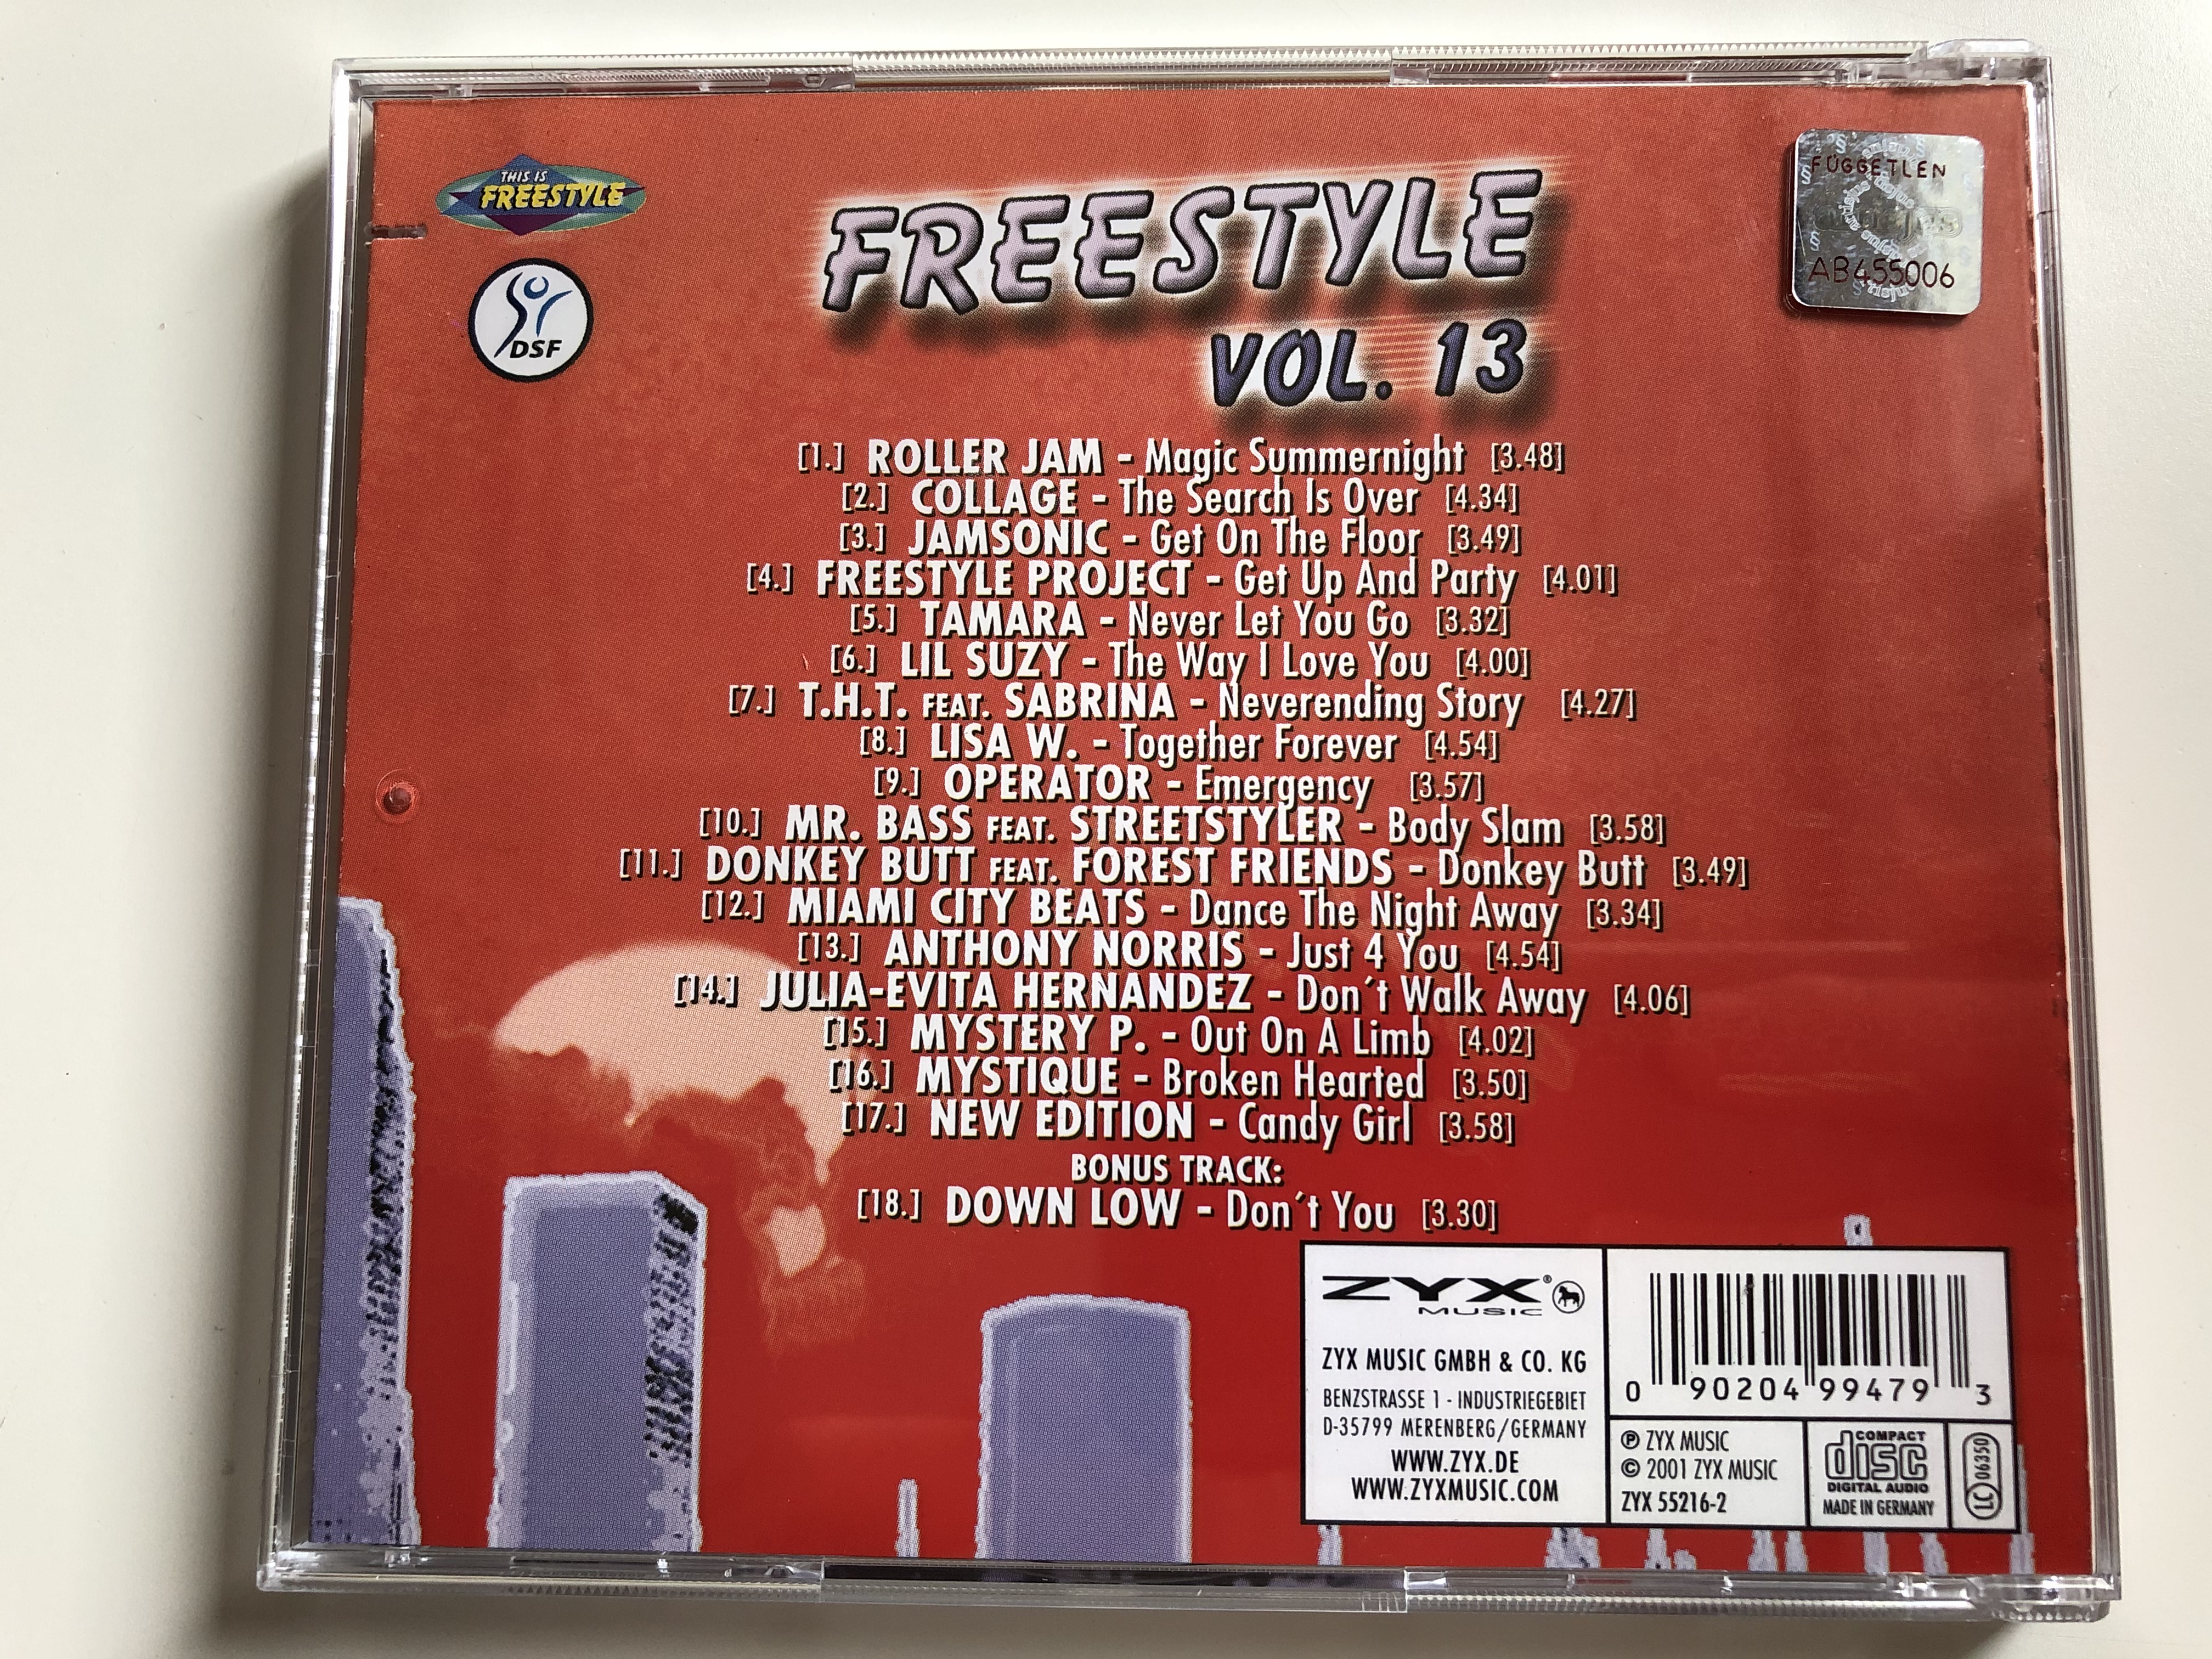 freestyle-vol.-13-incl.-lil-suzy-roller-jam-freestyle-project-julia-evita-hernandez-collage-lisa-w.-down-low-and-many-more-zyx-music-audio-cd-2001-zyx-55216-2-3-.jpg